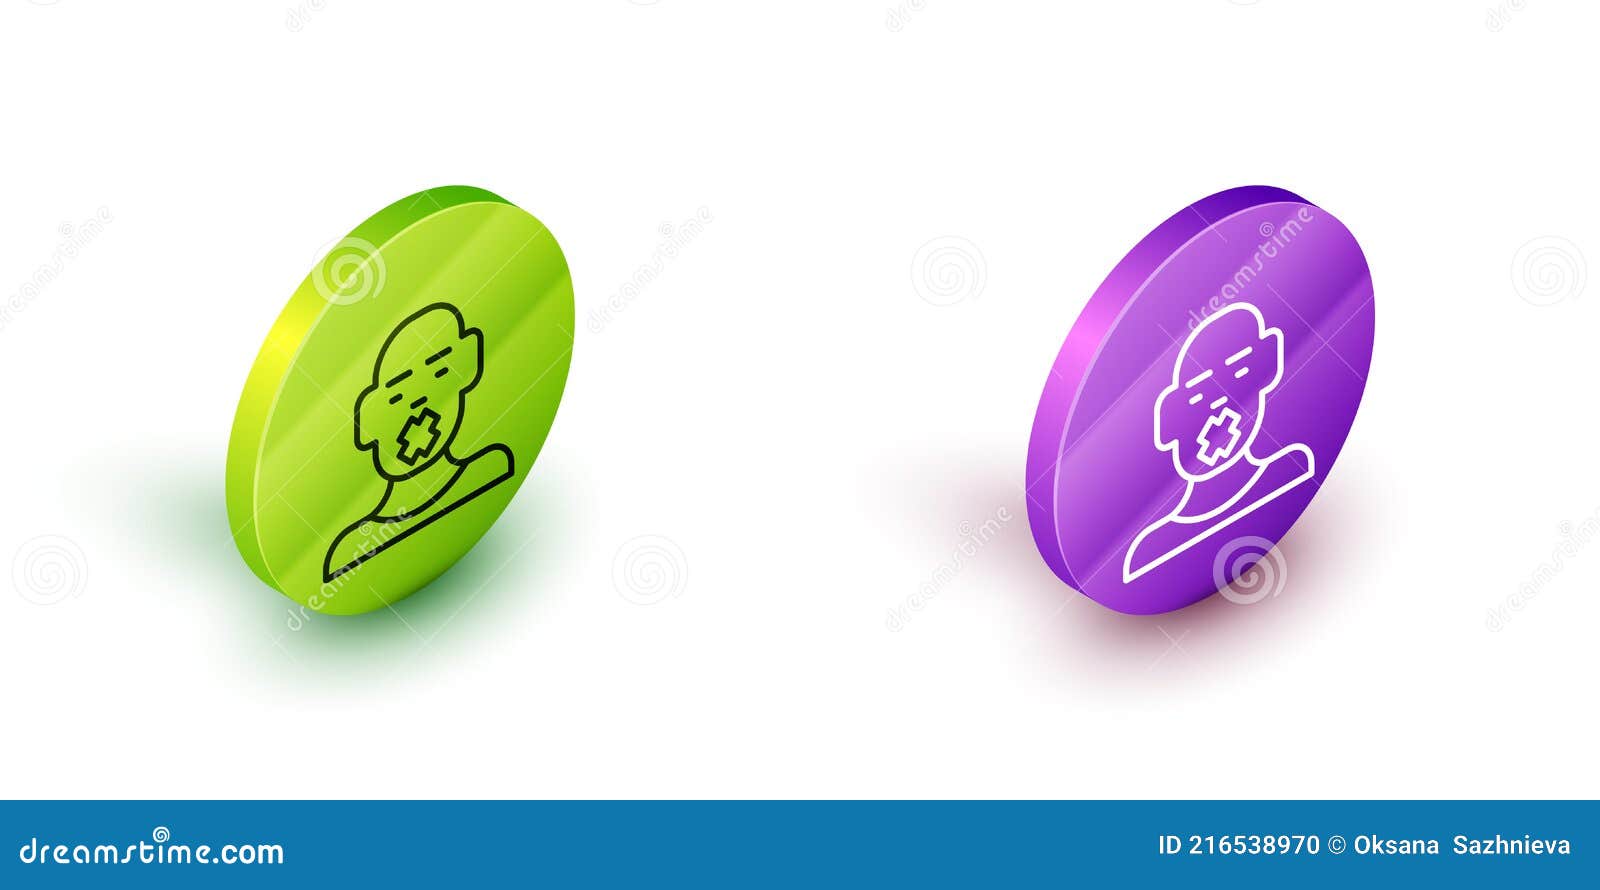 isometric line head of deaf and dumb guy icon  on white background. dumbness sign. disability concept. green and